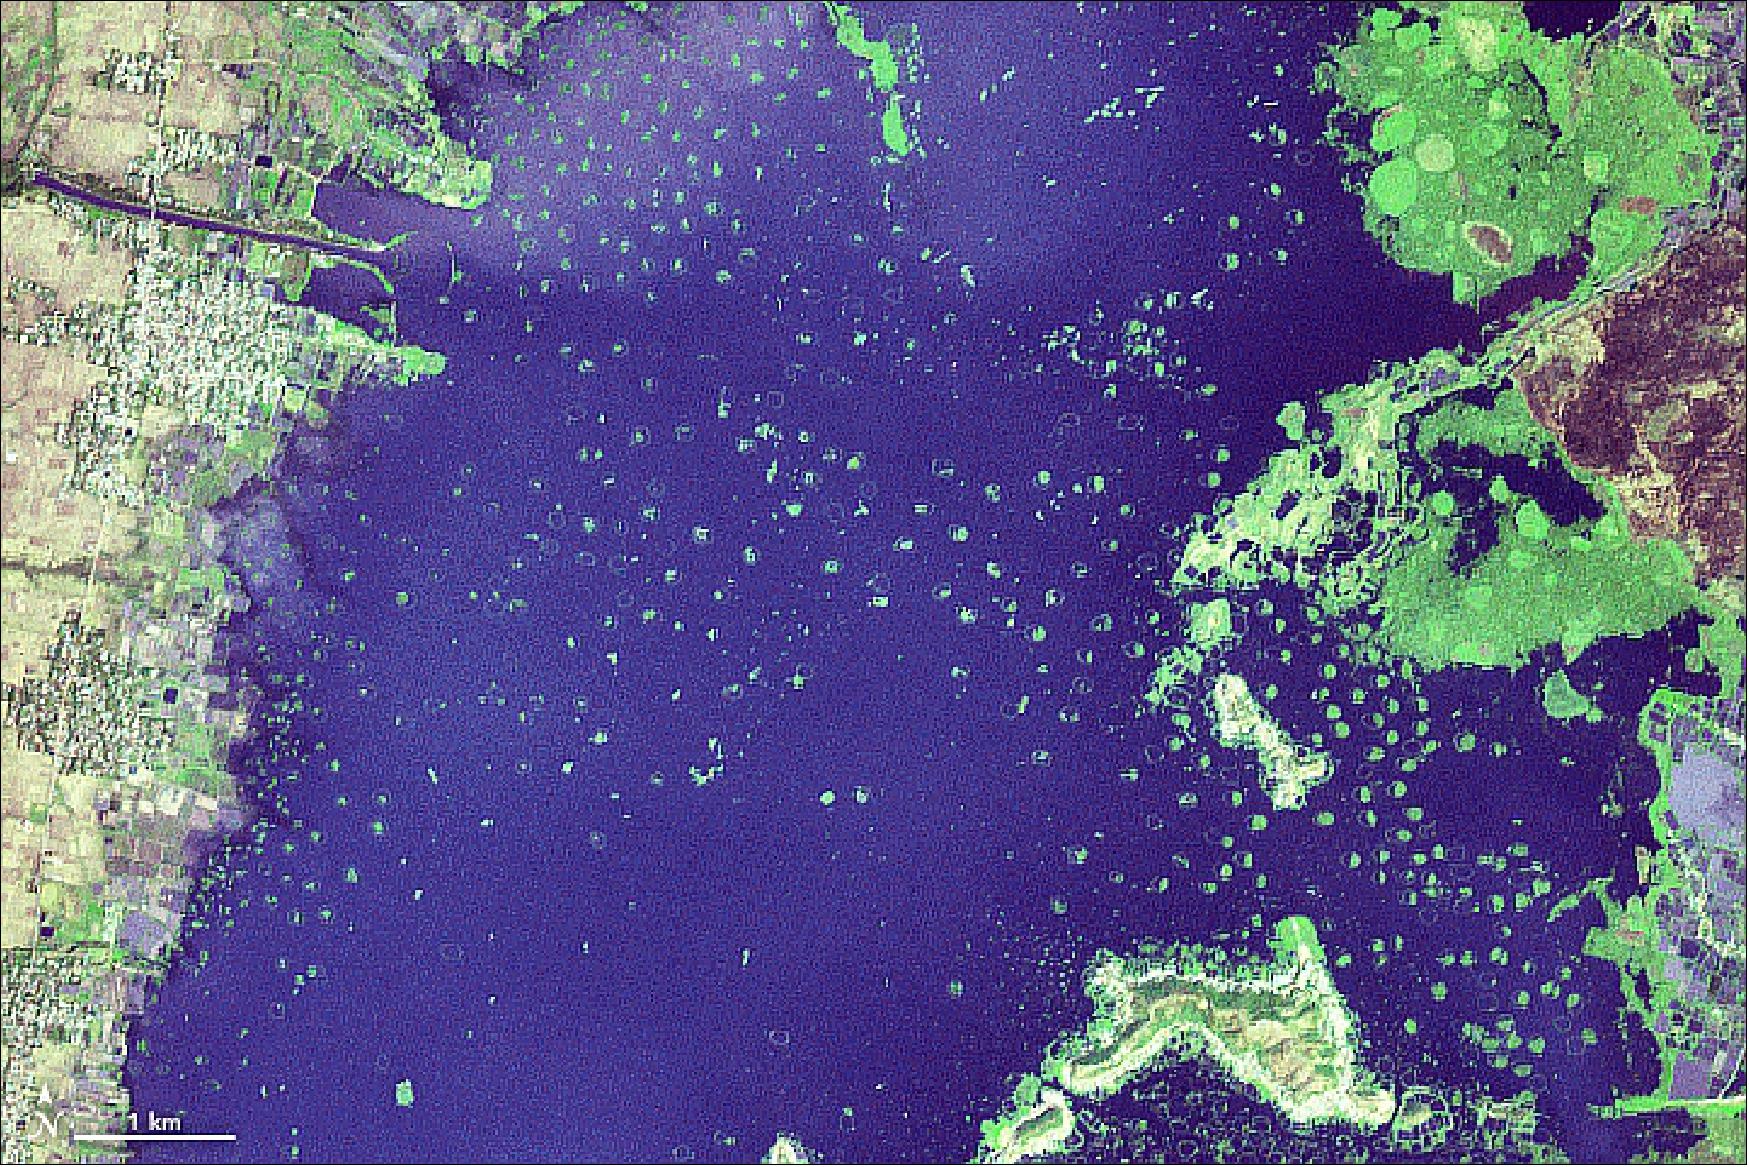 Figure 25: The satellite images of Loktak Lake (Figures 25 and 26) were acquired on March 19, 2018, by ASTER (Advanced Spaceborne Thermal Emission and Reflection Radiometer) on the Terra satellite (image credit: NASA Earth Observatory, images by Joshua Stevens, using data from NASA/GSFC/METI/ERSDAC/JAROS, and U.S./Japan ASTER Science Team, story by Kasha Patel)